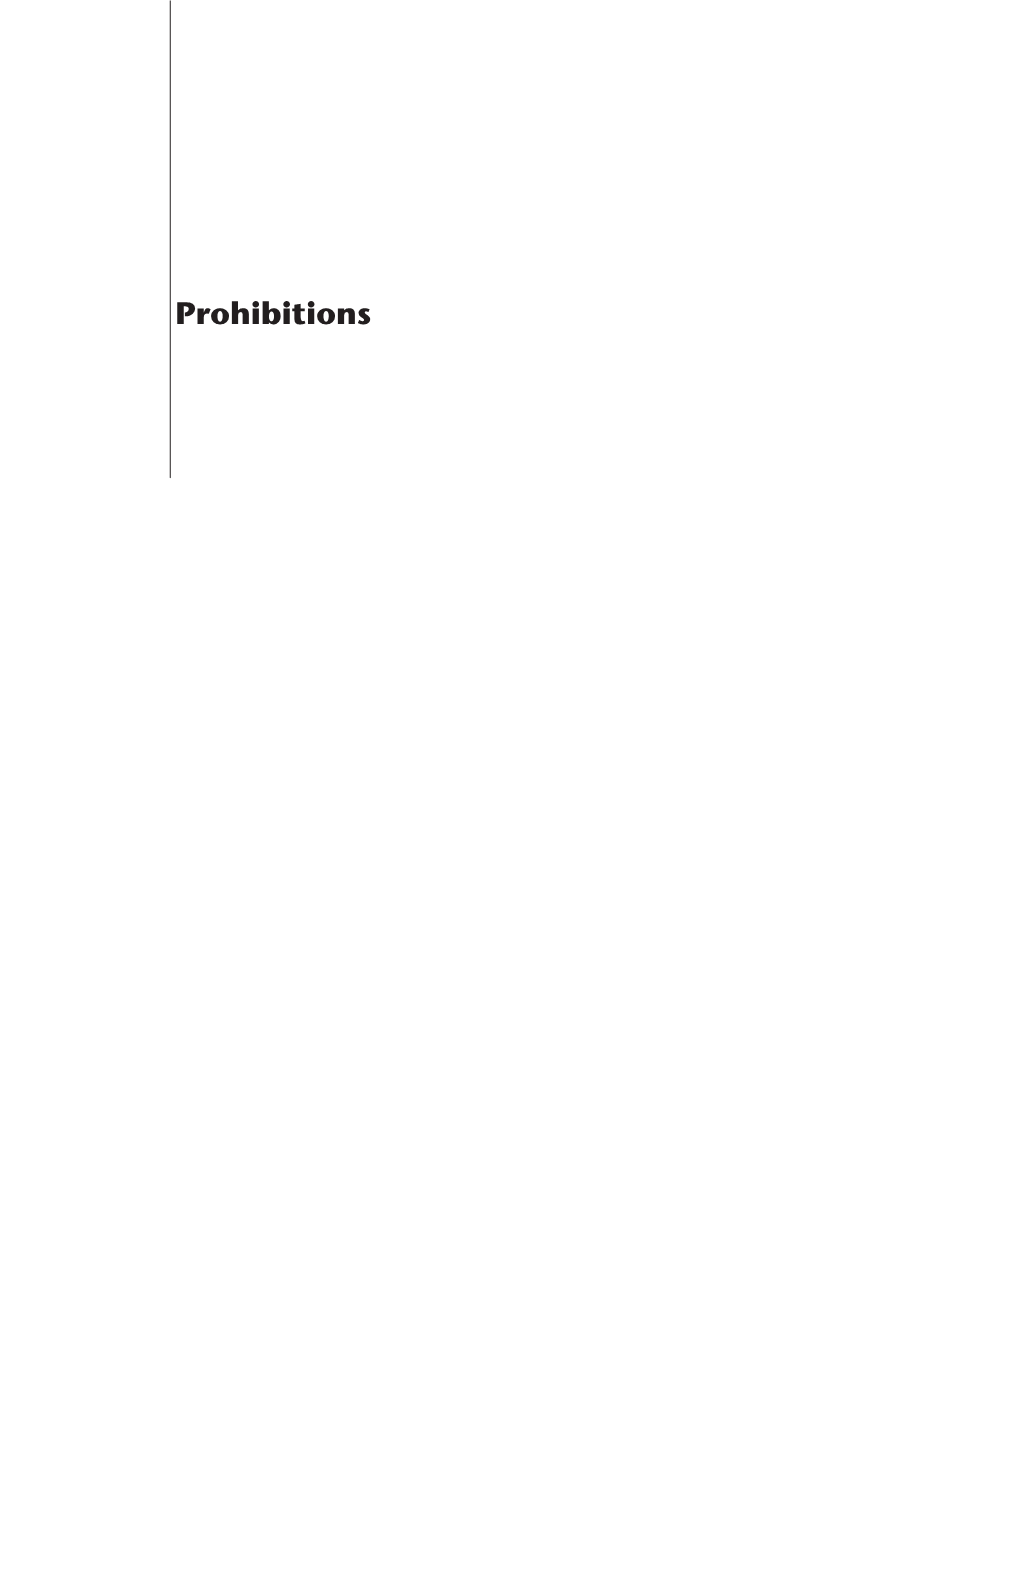 Prohibitions Prohibitions Edited by John Meadowcroft with Contributions from Ralf M